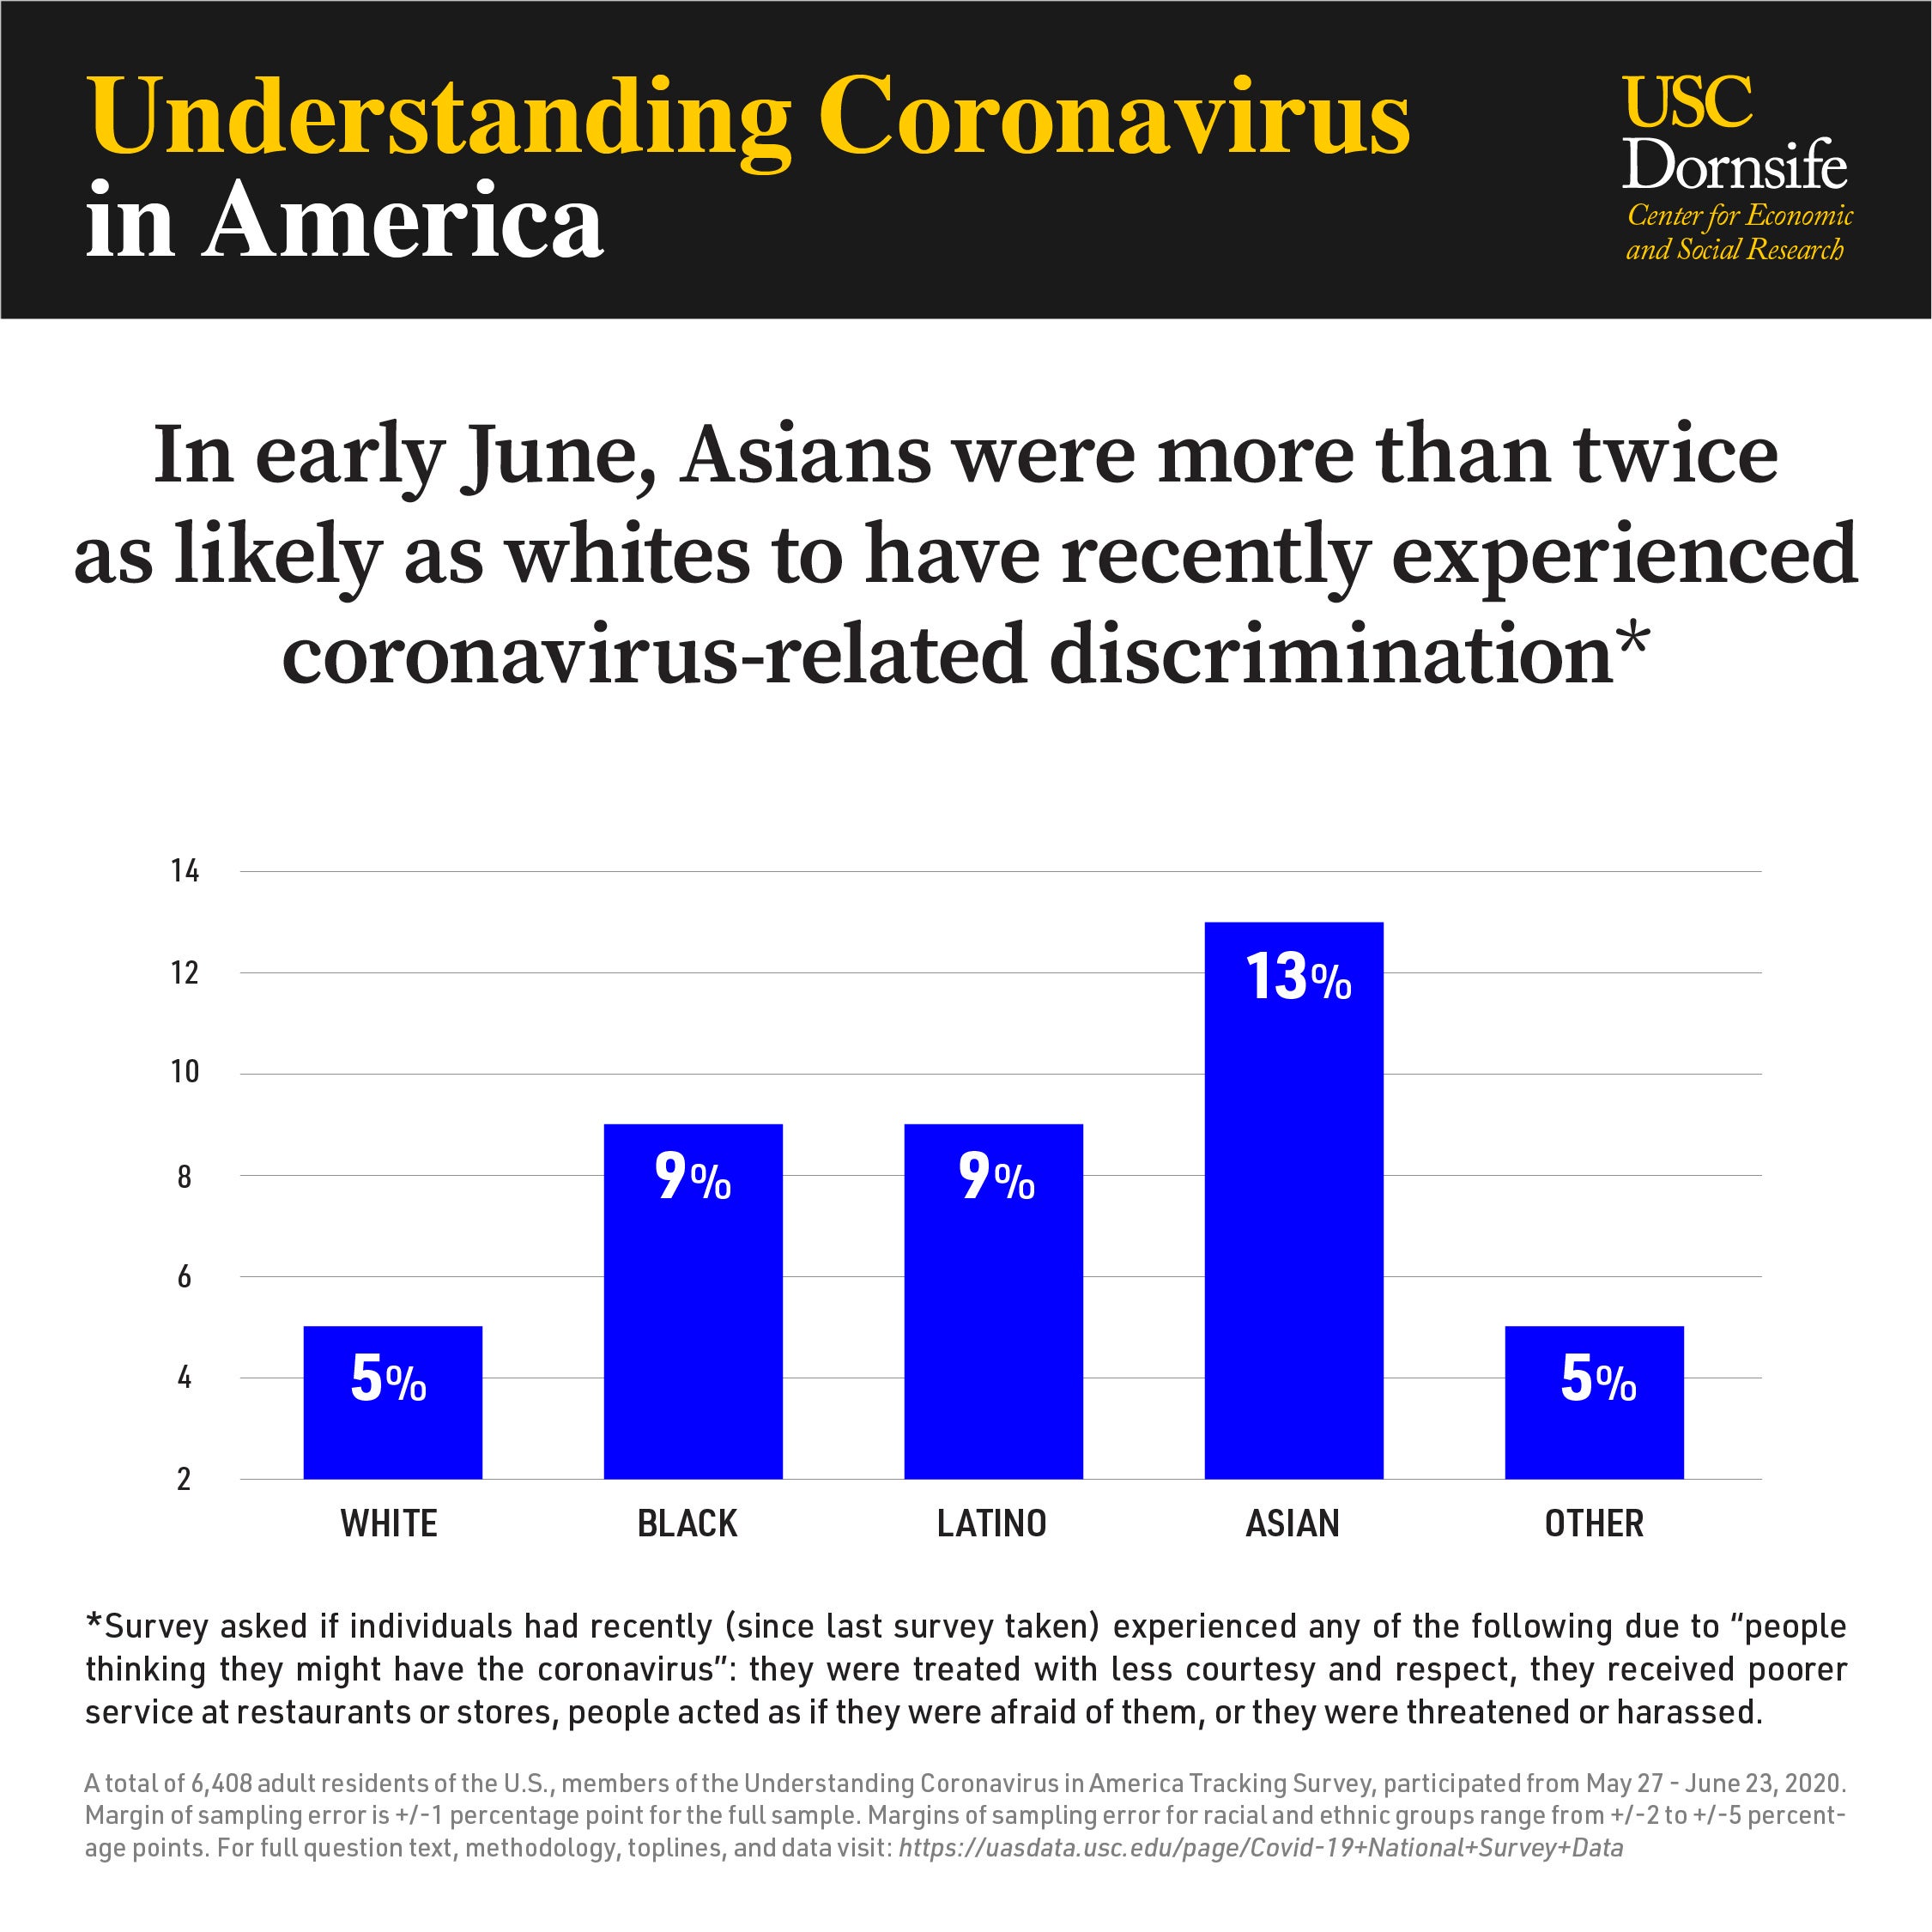 Bar graph shows 5% of whites, 9% of Blacks, 9% of Latinos, 13% of Asians and 5% of others experienced coronavirus-related discrimination in early June 2020.